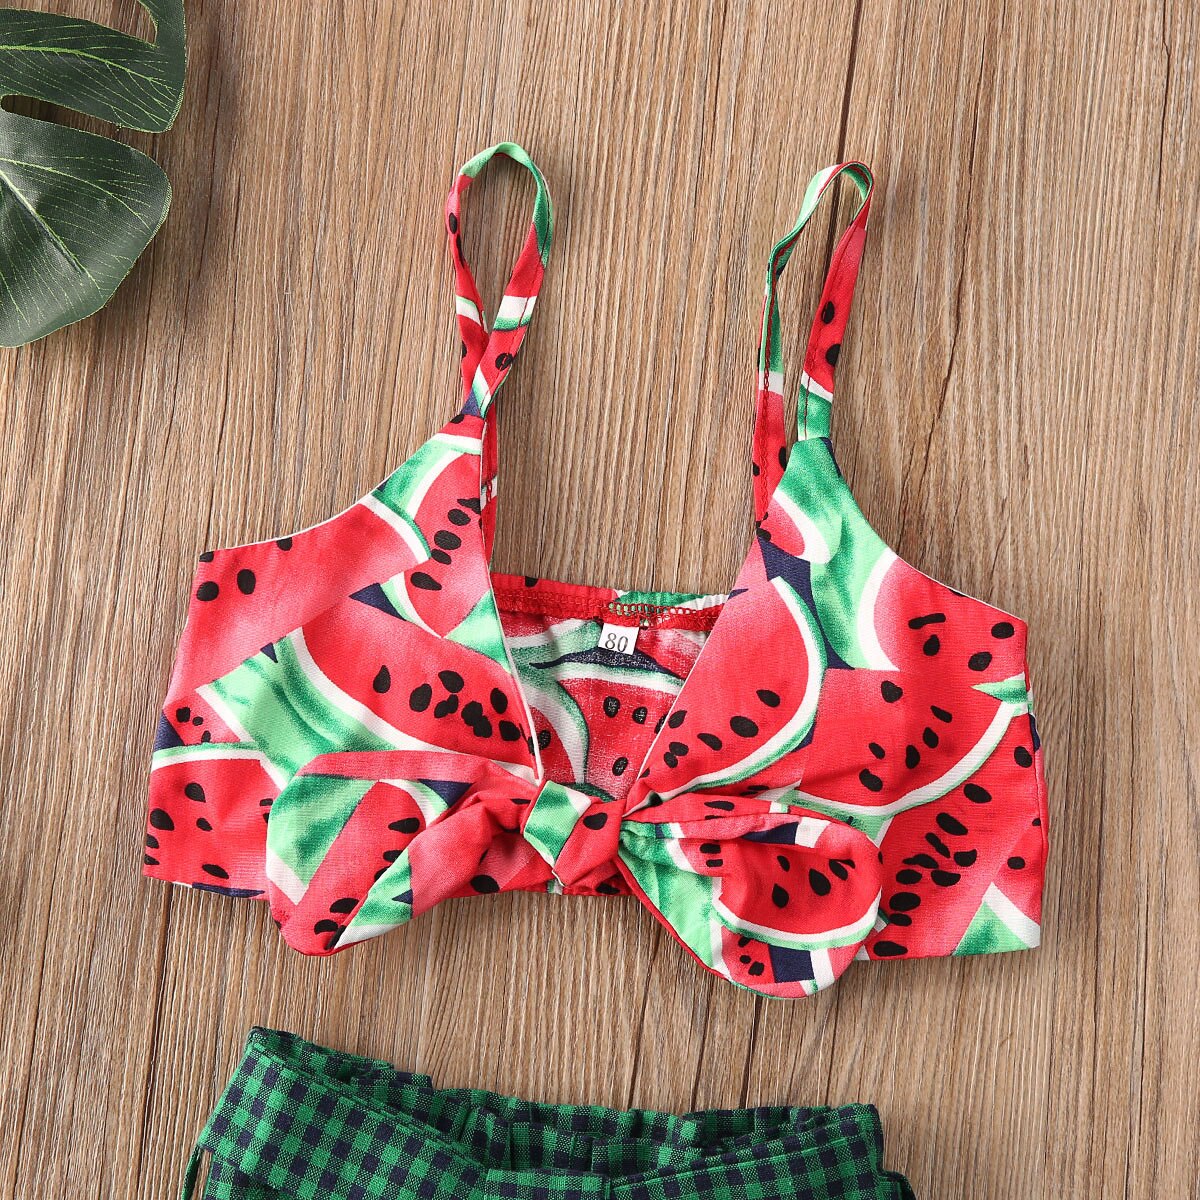 Emmababy-Summer-Toddler-Baby-Girls-Clothes-Watermelon-Bow-Vest-Crop-Tops-Shirt-Plaid-Short-Pants-Outfits-1